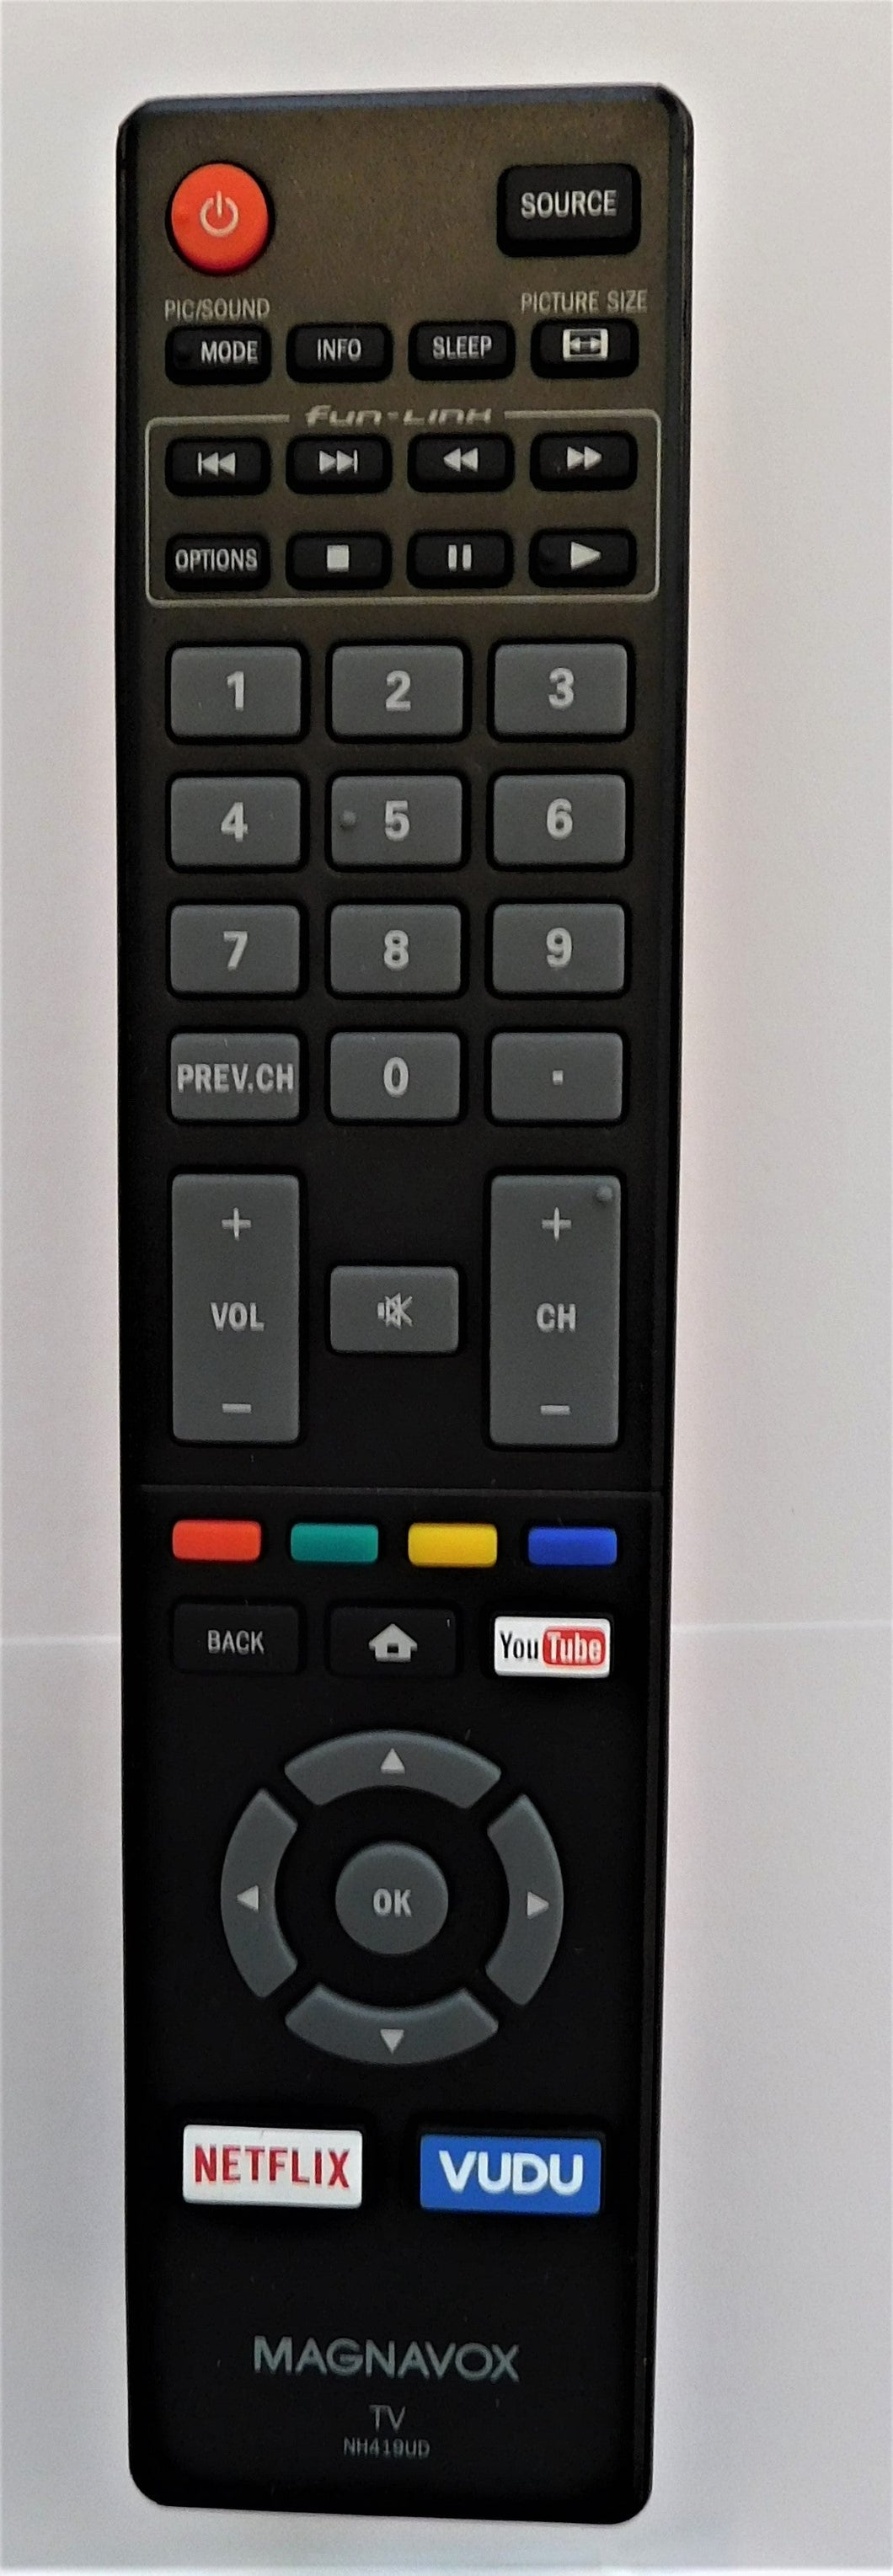 Original OEM replacement remote control for Magnavox LED/LCD TVs NH419UD